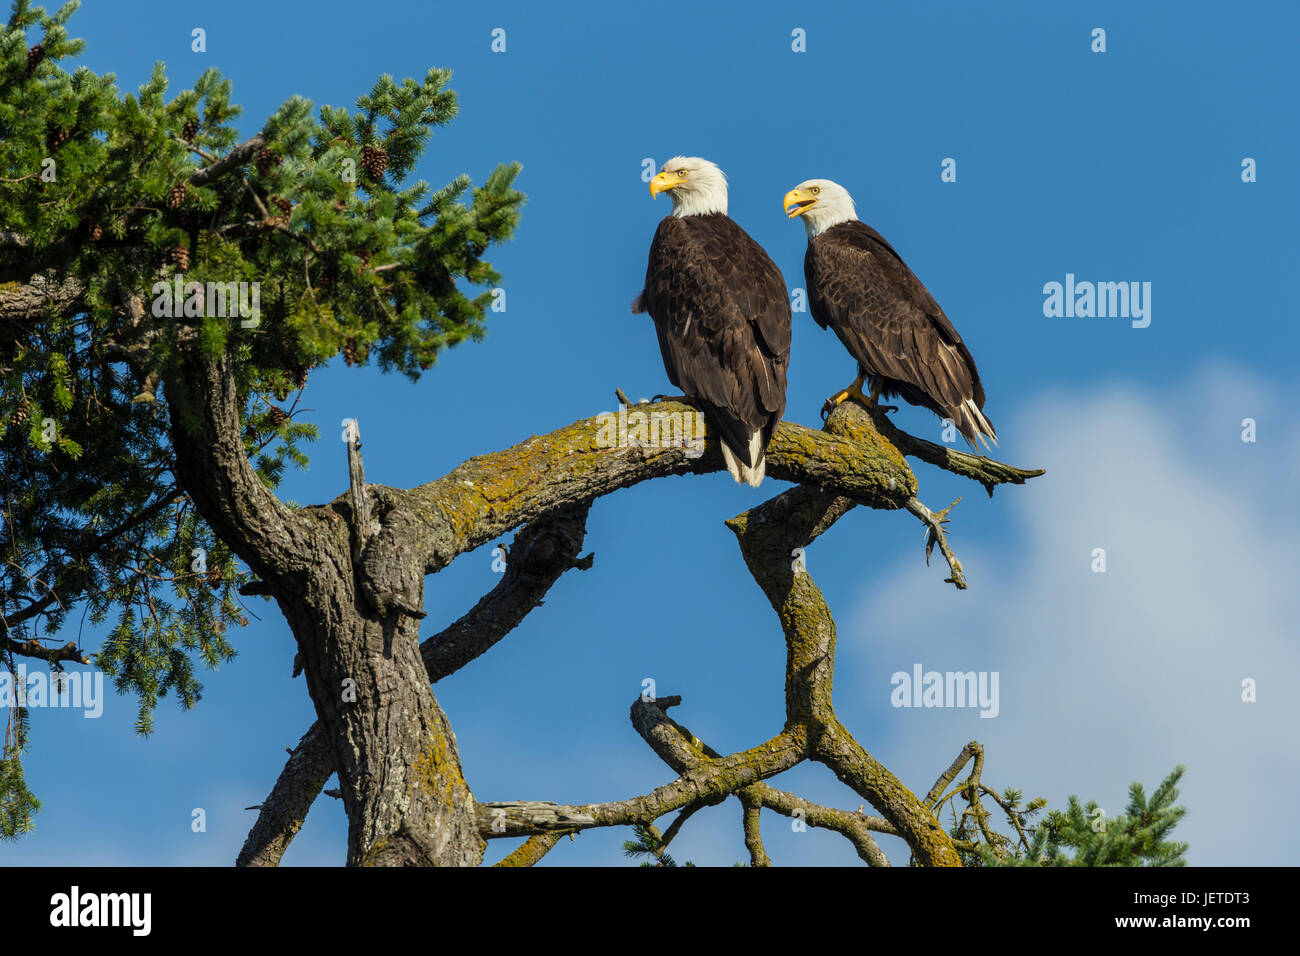 Bald Eagle pair perched on tree overlooking Robert's Bay-Sidney, British Columbia, Canada. Stock Photo